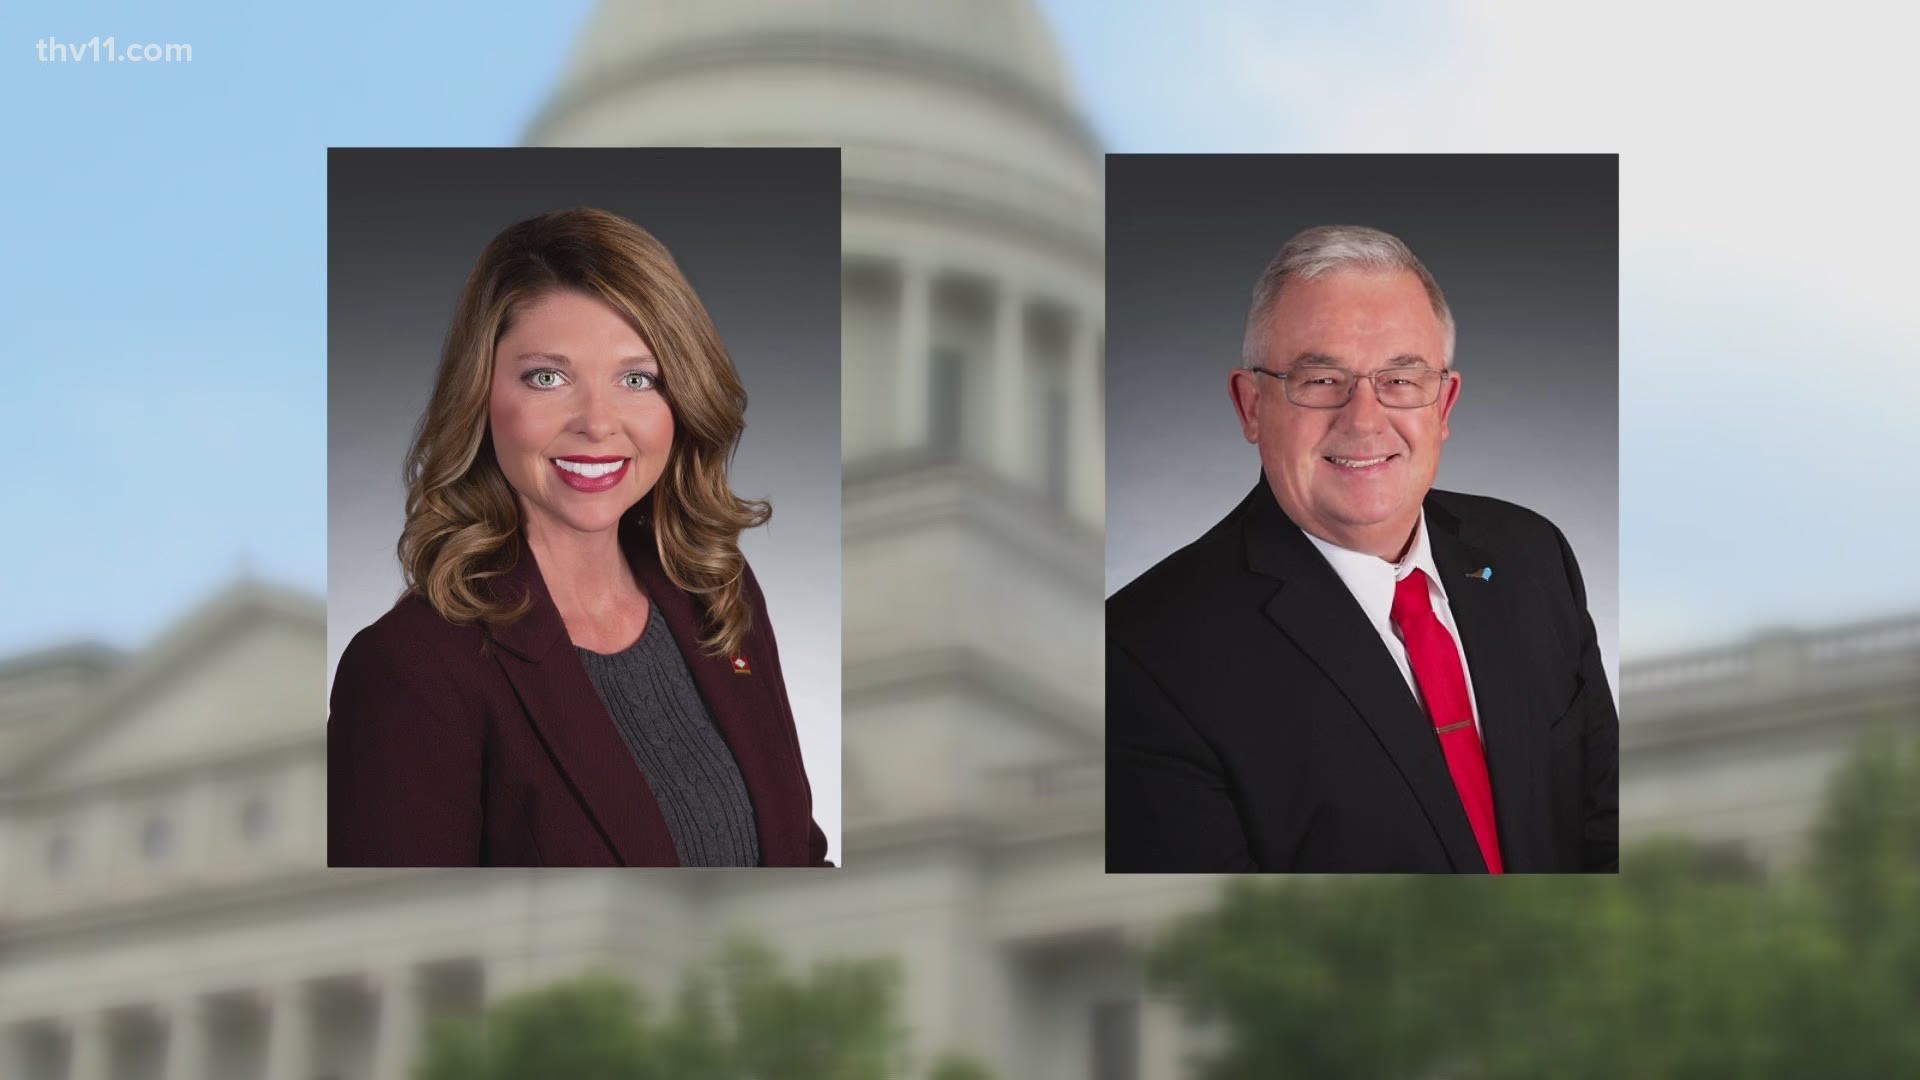 Three Arkansas lawmakers have tested positive for COVID-19. Governor Hutchinson has been exposed, but tested negative.